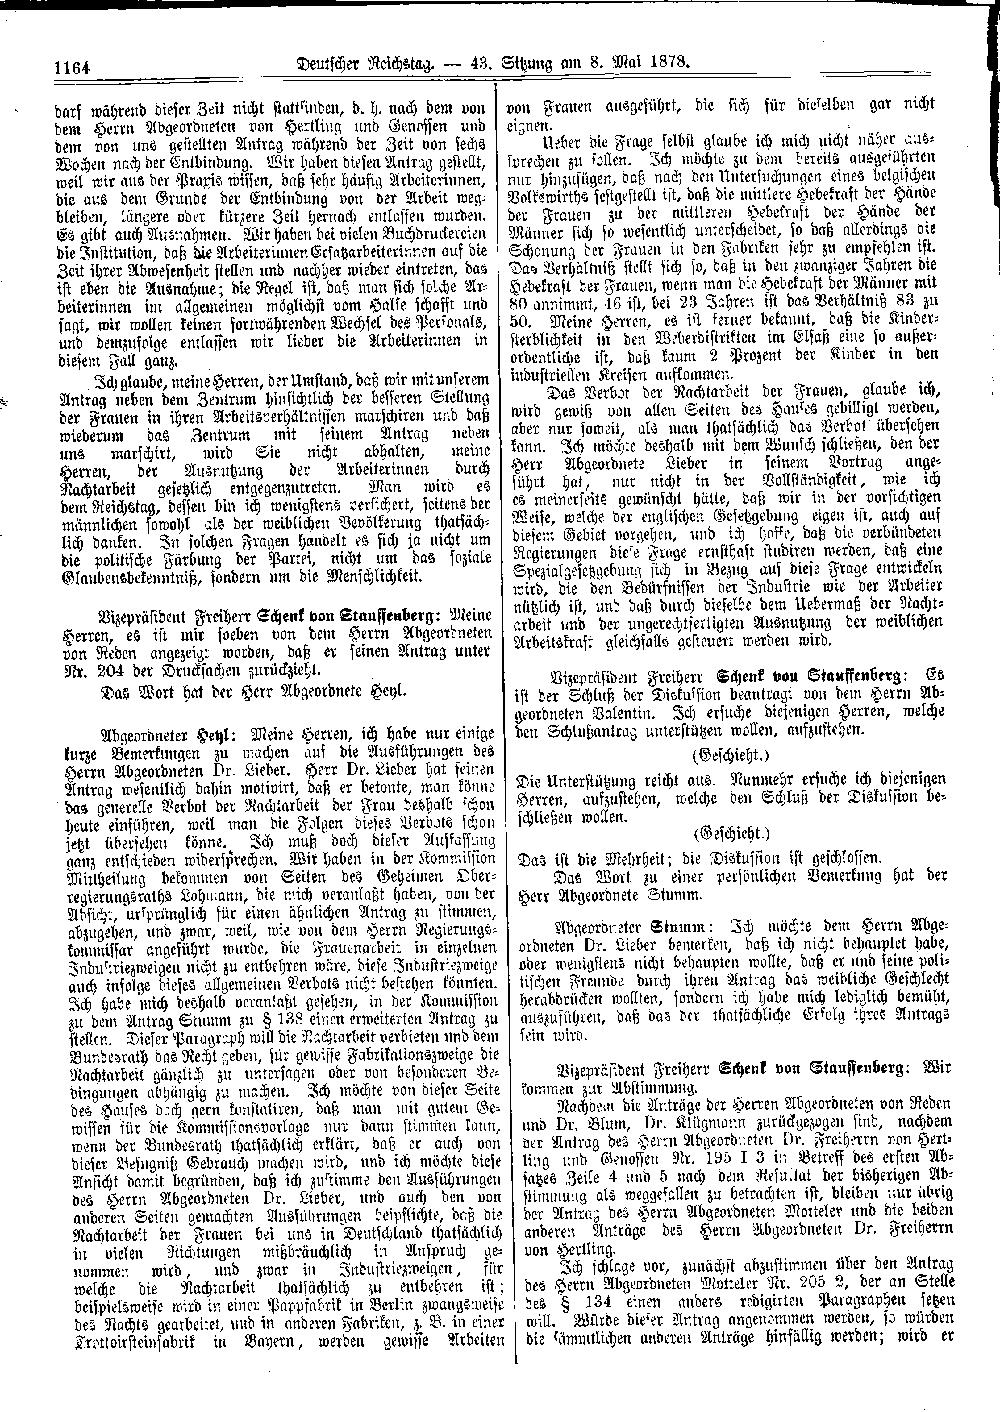 Scan of page 1164